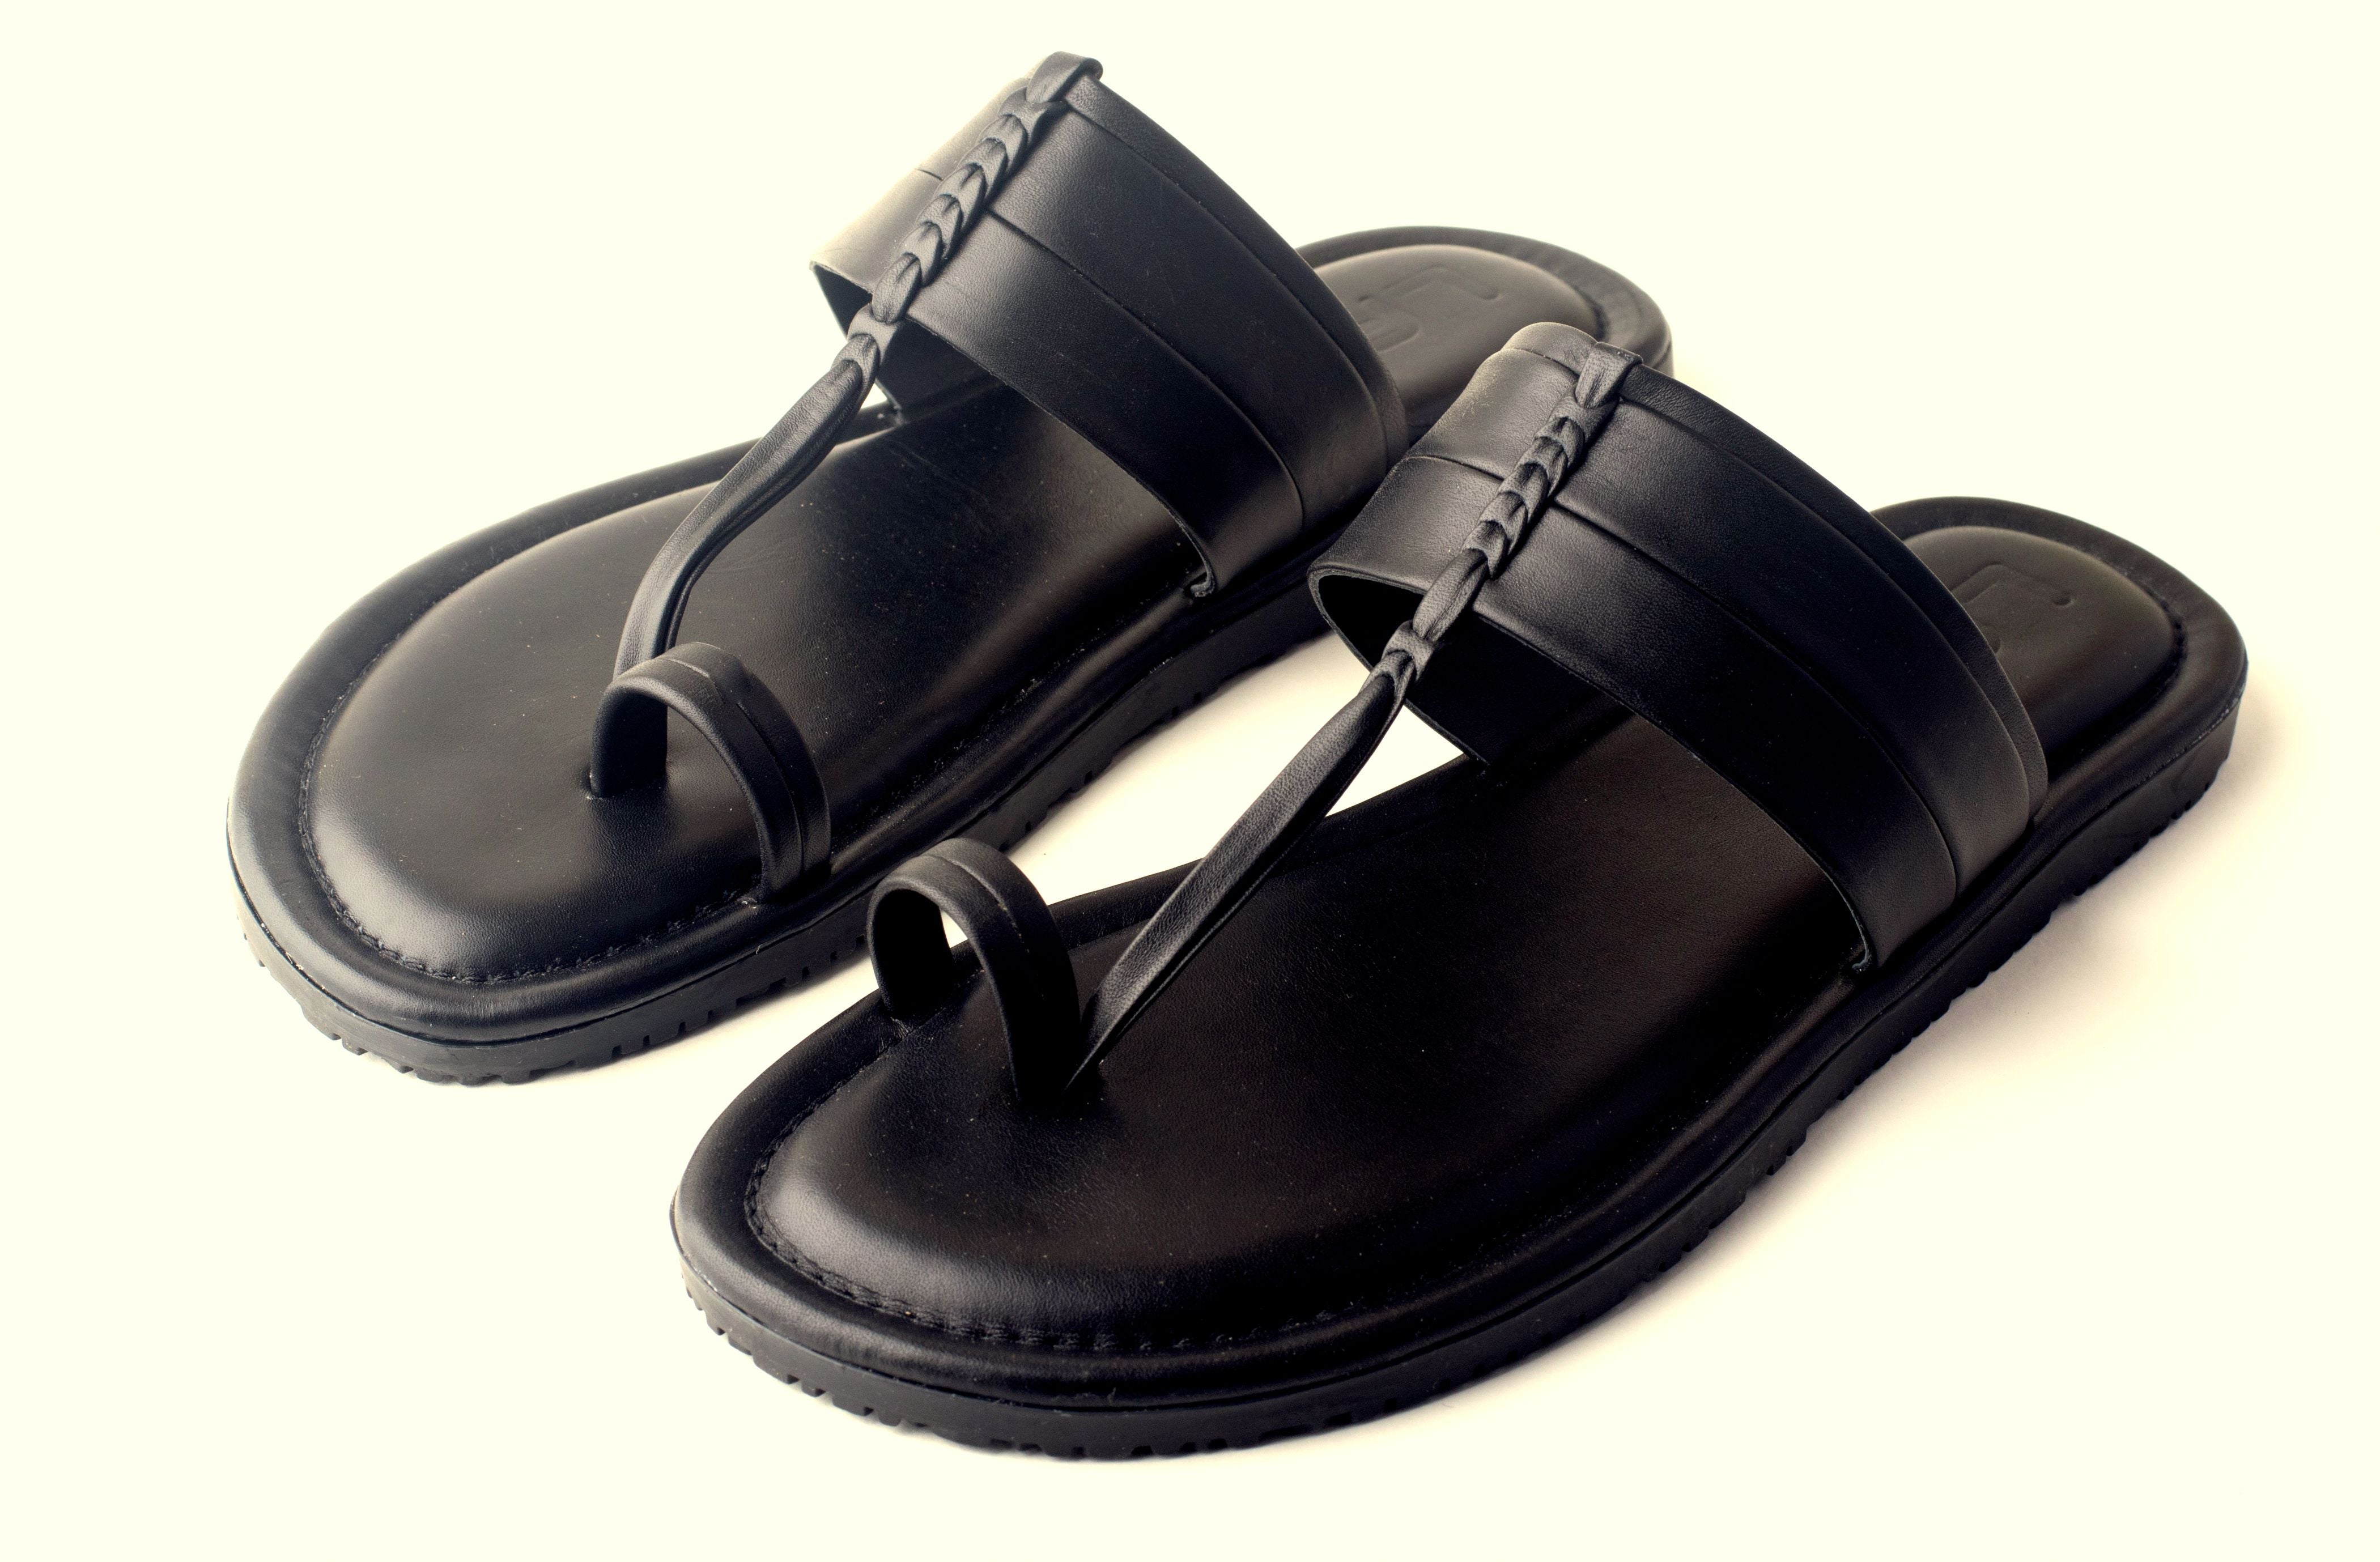 Fashion :: Men :: Men's Footwear :: Kolhapuri Chappal in Genuine Leather  with Black Pointed Shape Base and Traditional Yellow Upper. Handmade in  Kolhapur for men's